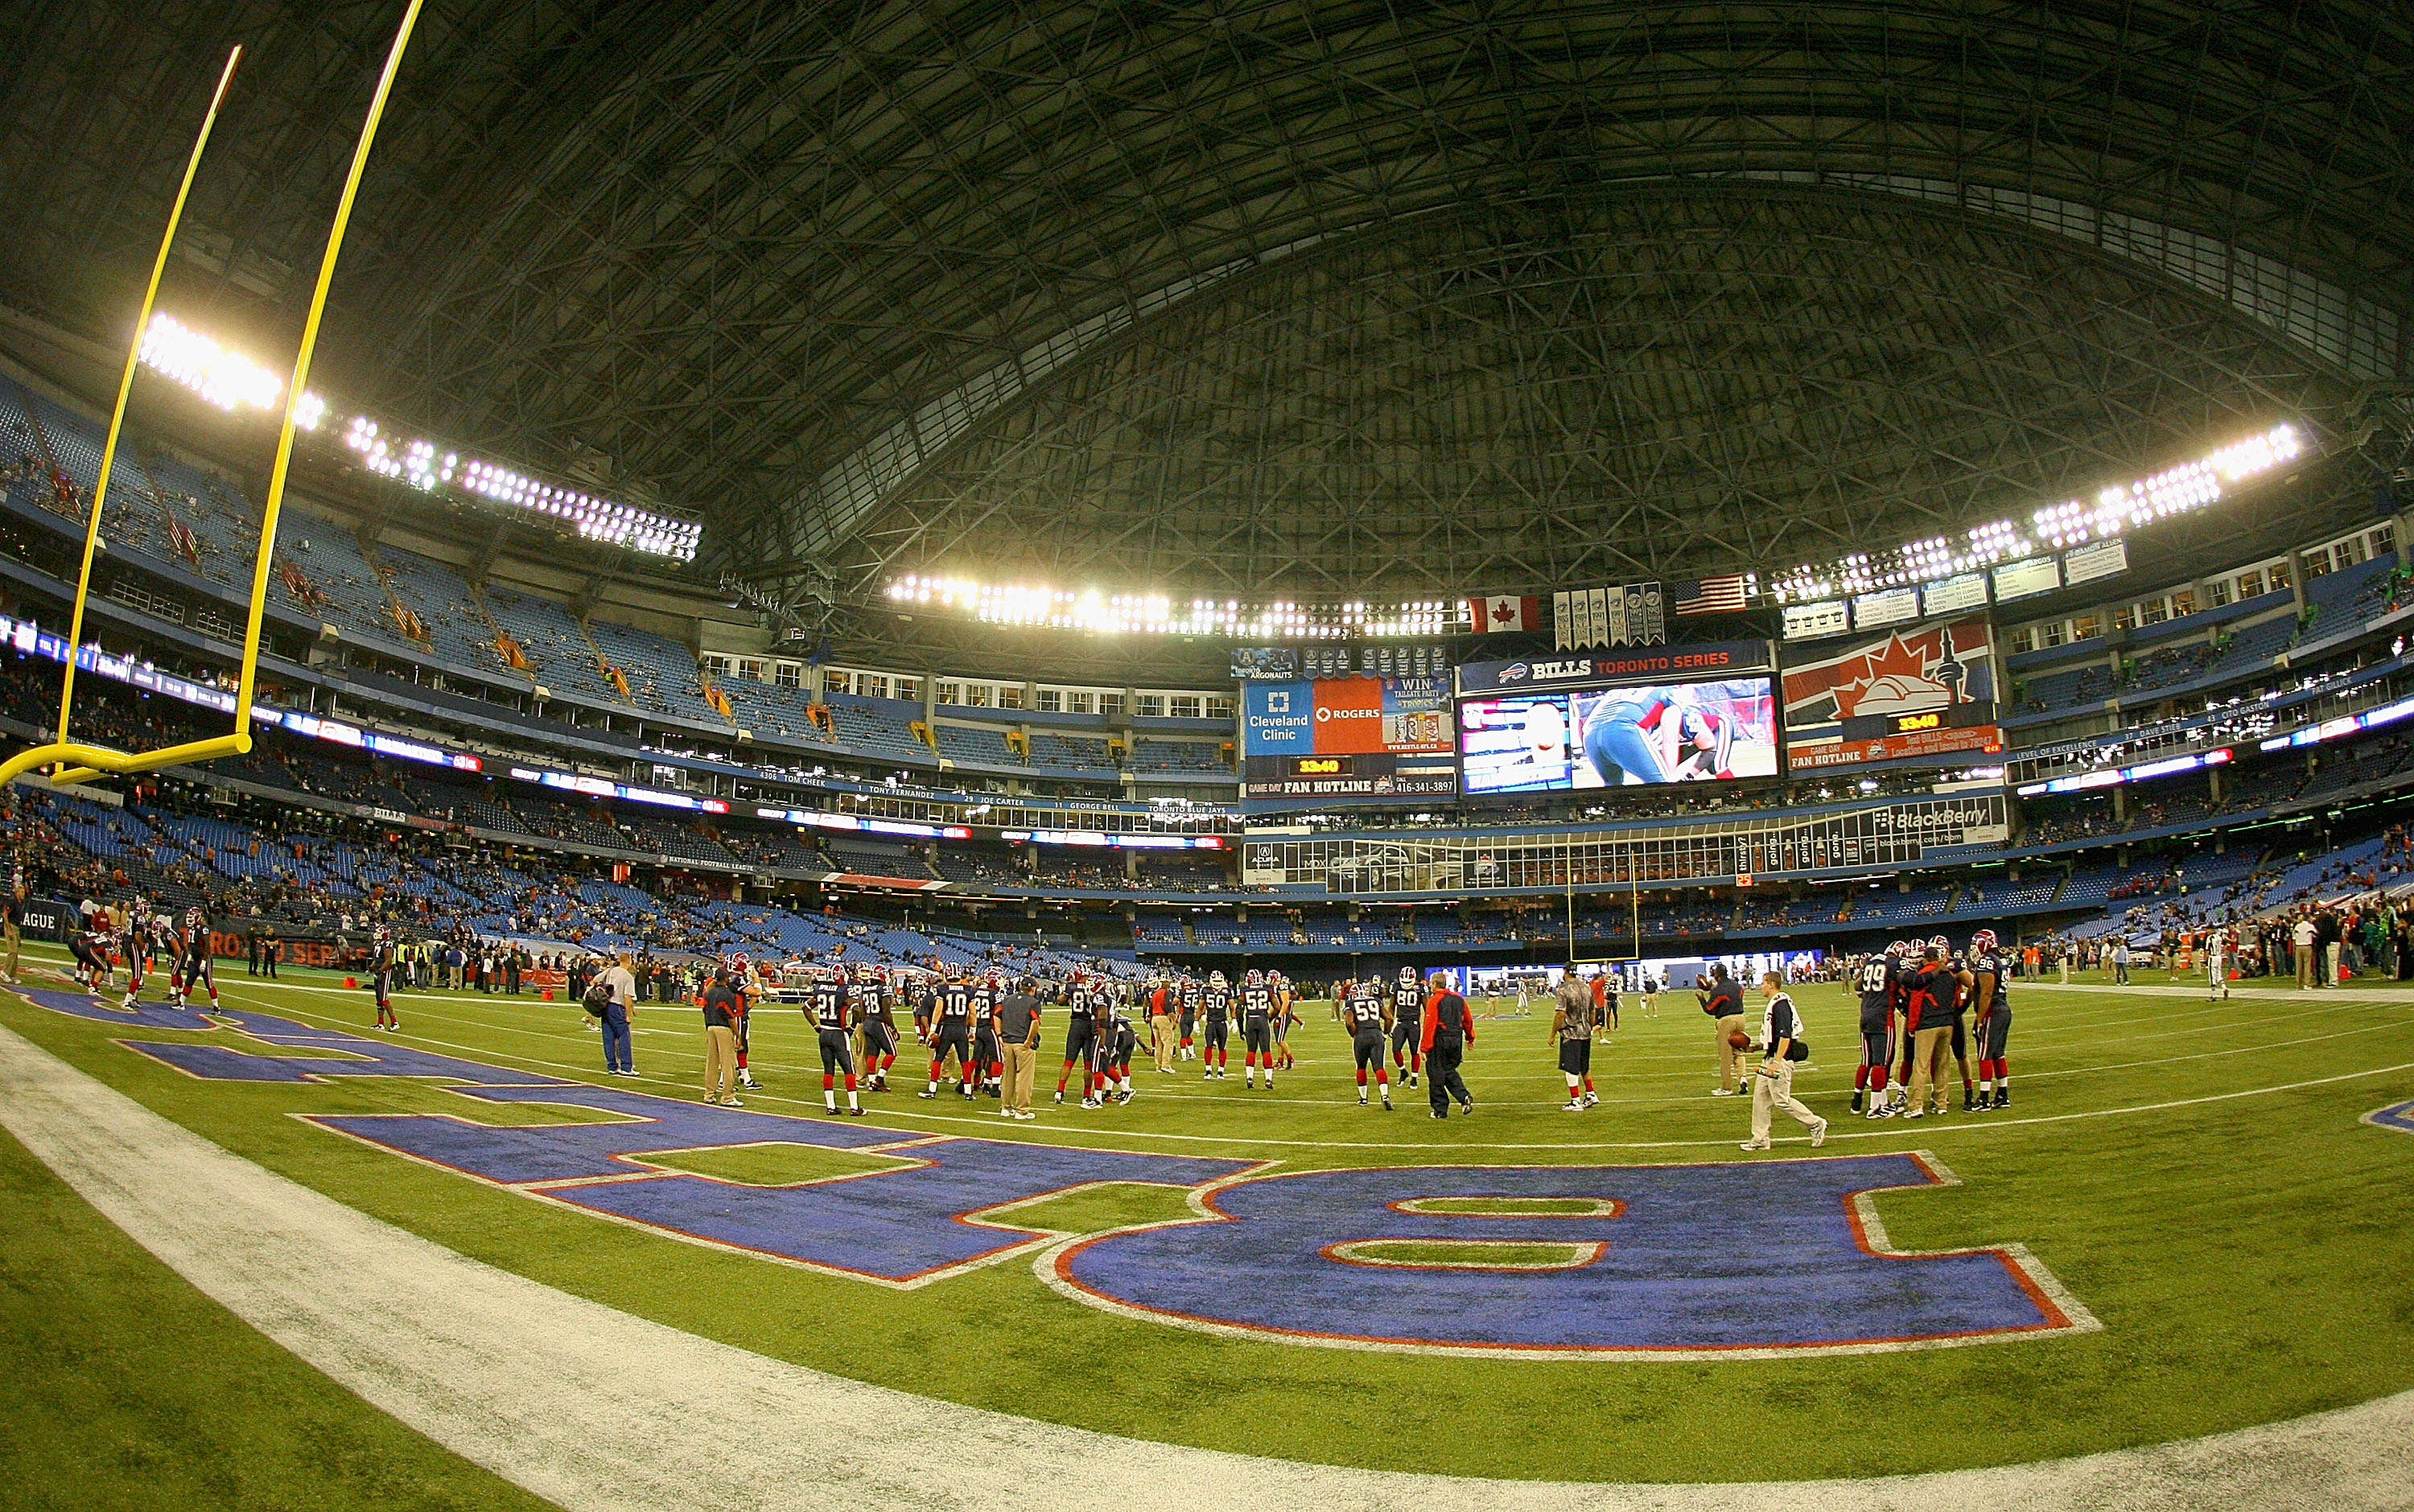 TORONTO, ON - NOVEMBER 07: The Buffalo Bills and the Chicago Bears warm up prior to play at the  Rogers Centre on November 7, 2010 in Toronto, Canada.  (Photo by Rick Stewart/Getty Images)